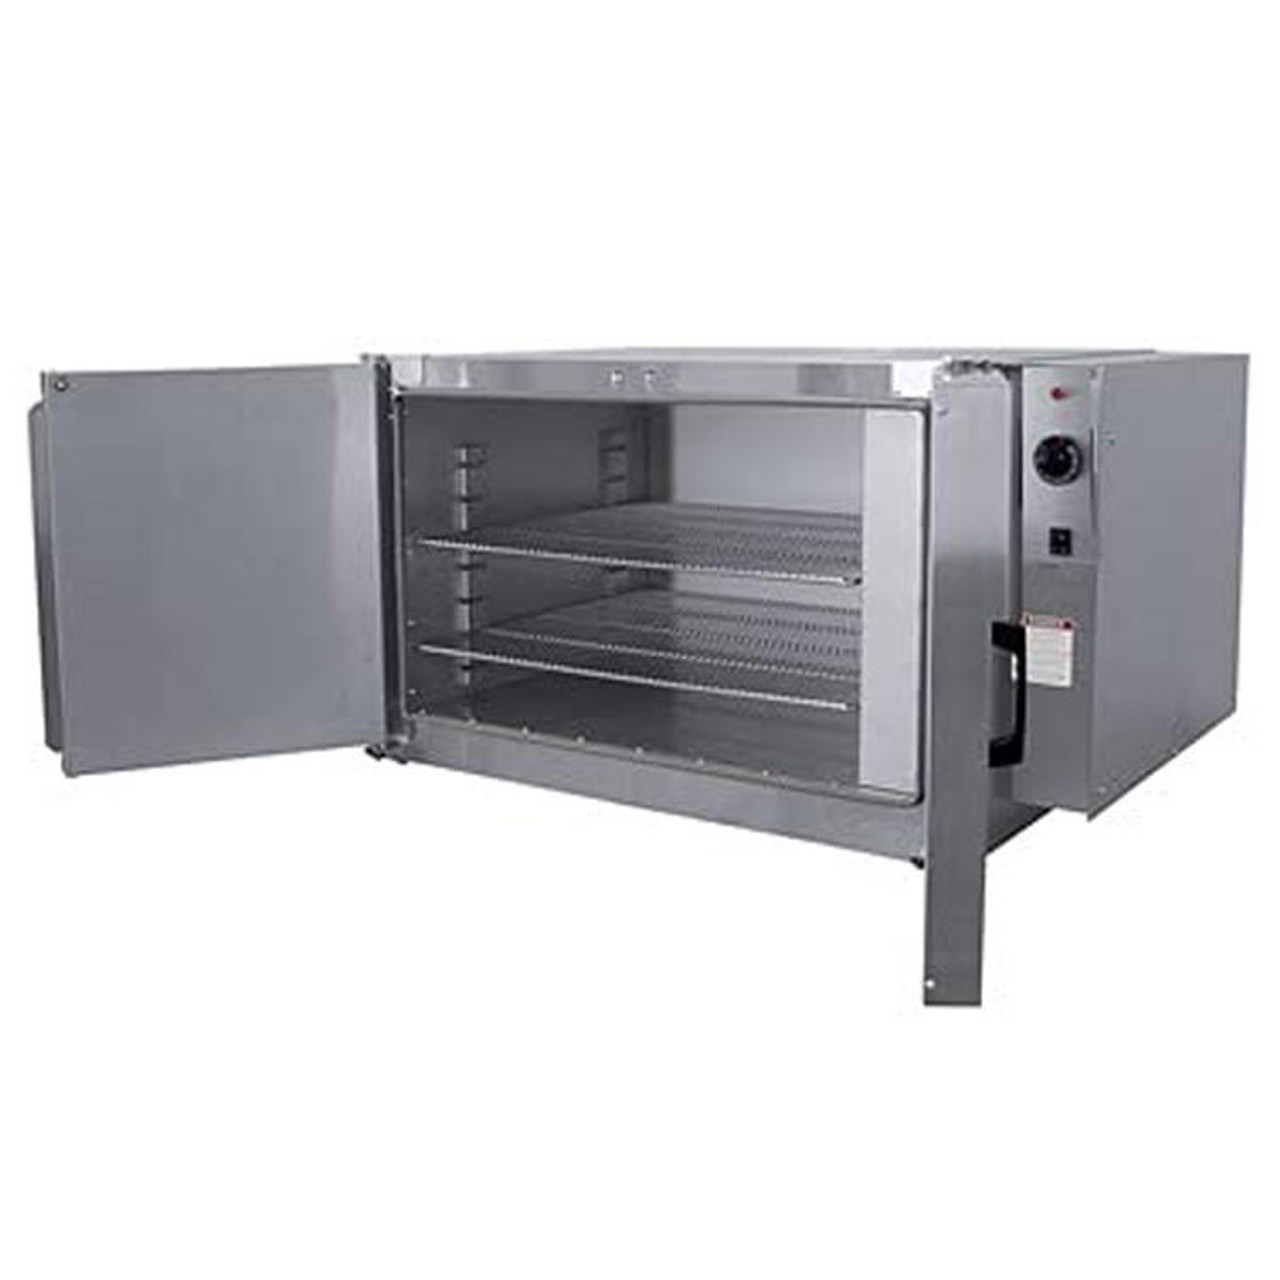 https://cdn11.bigcommerce.com/s-zgzol/images/stencil/1280x1280/products/55330/129875/grieve-nb-350-lab-bench-industrial-drying-oven-208v-350-degree-f-7-cu-ft-forced-air-convection__83177.1673828014.jpg?c=2